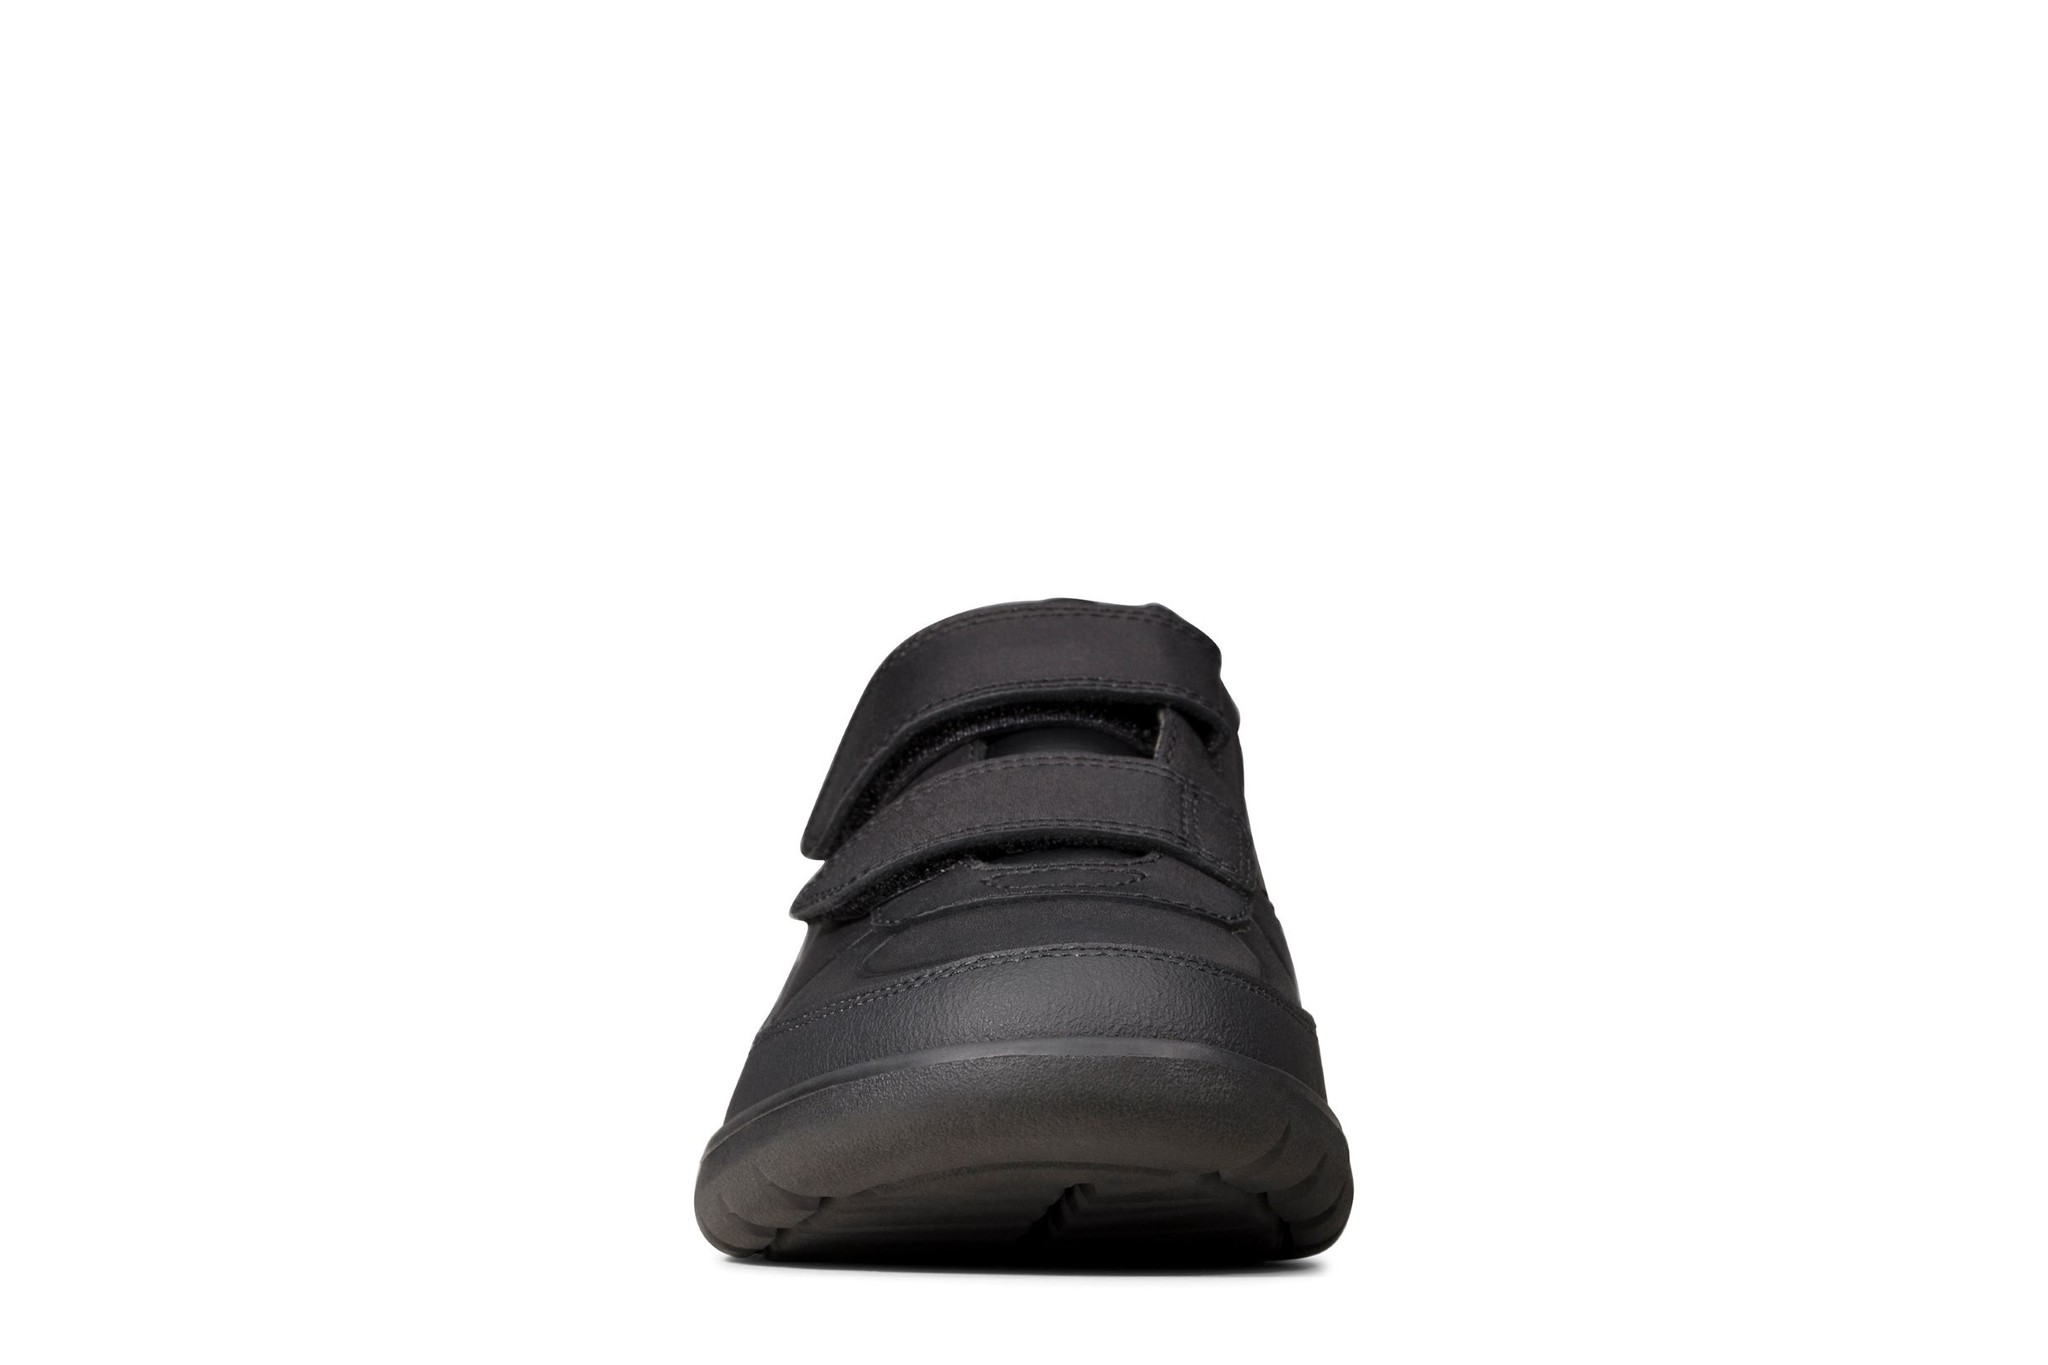 Clarks Scape Flare Youth